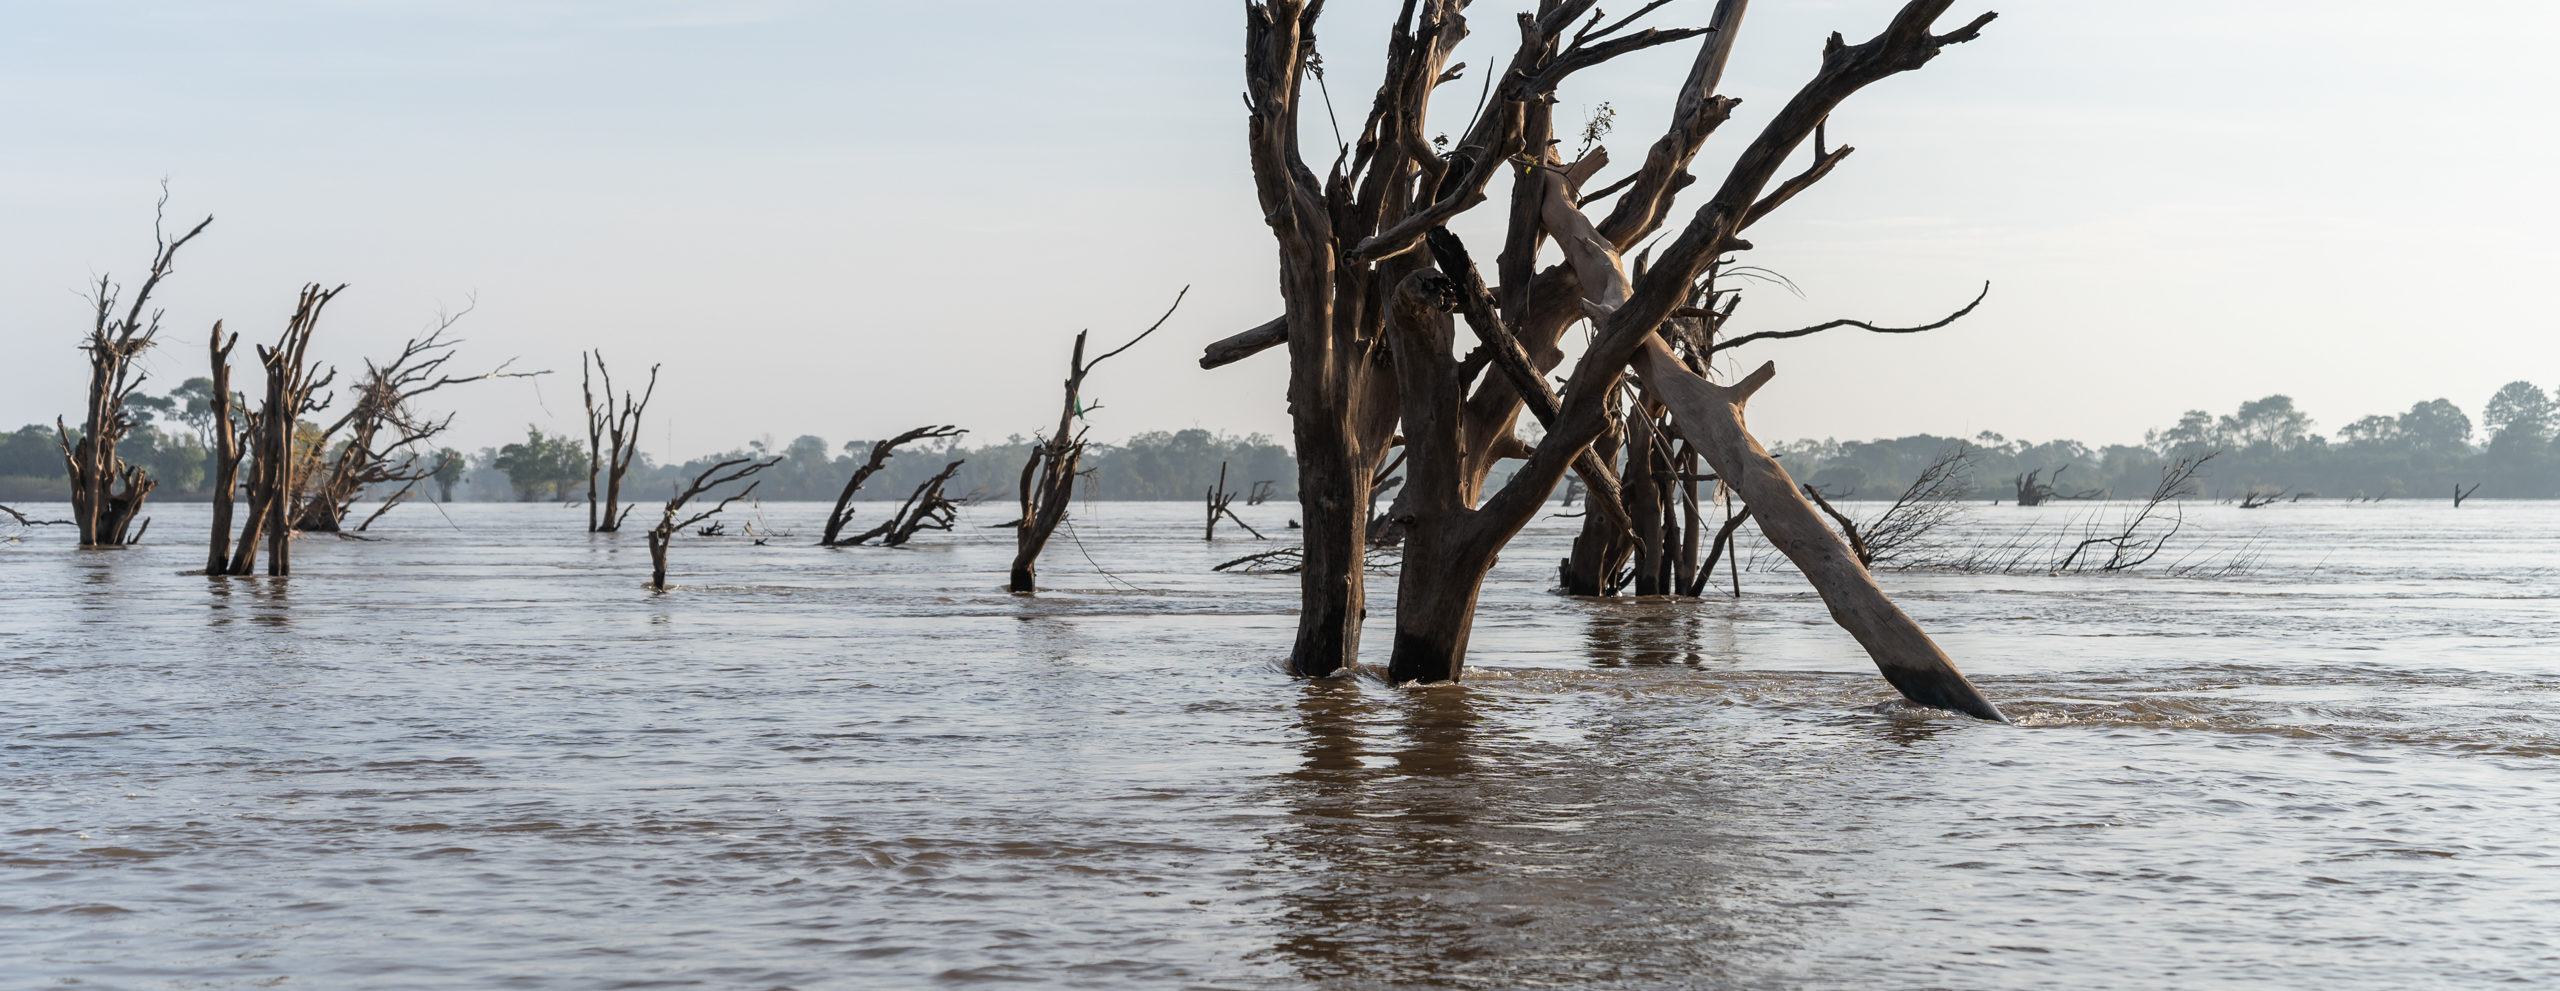 <p>Dead trees in the Mekong River in October 2022. This was previously a living section of the Stung Treng flooded forest, a protected area recognised as a Ramsar Wetland of International Importance. (Image: <a href=https://andyballmedia.com/ target=_blank rel="noreferrer noopener">Andy Ball</a> / The Third Pole)</p>